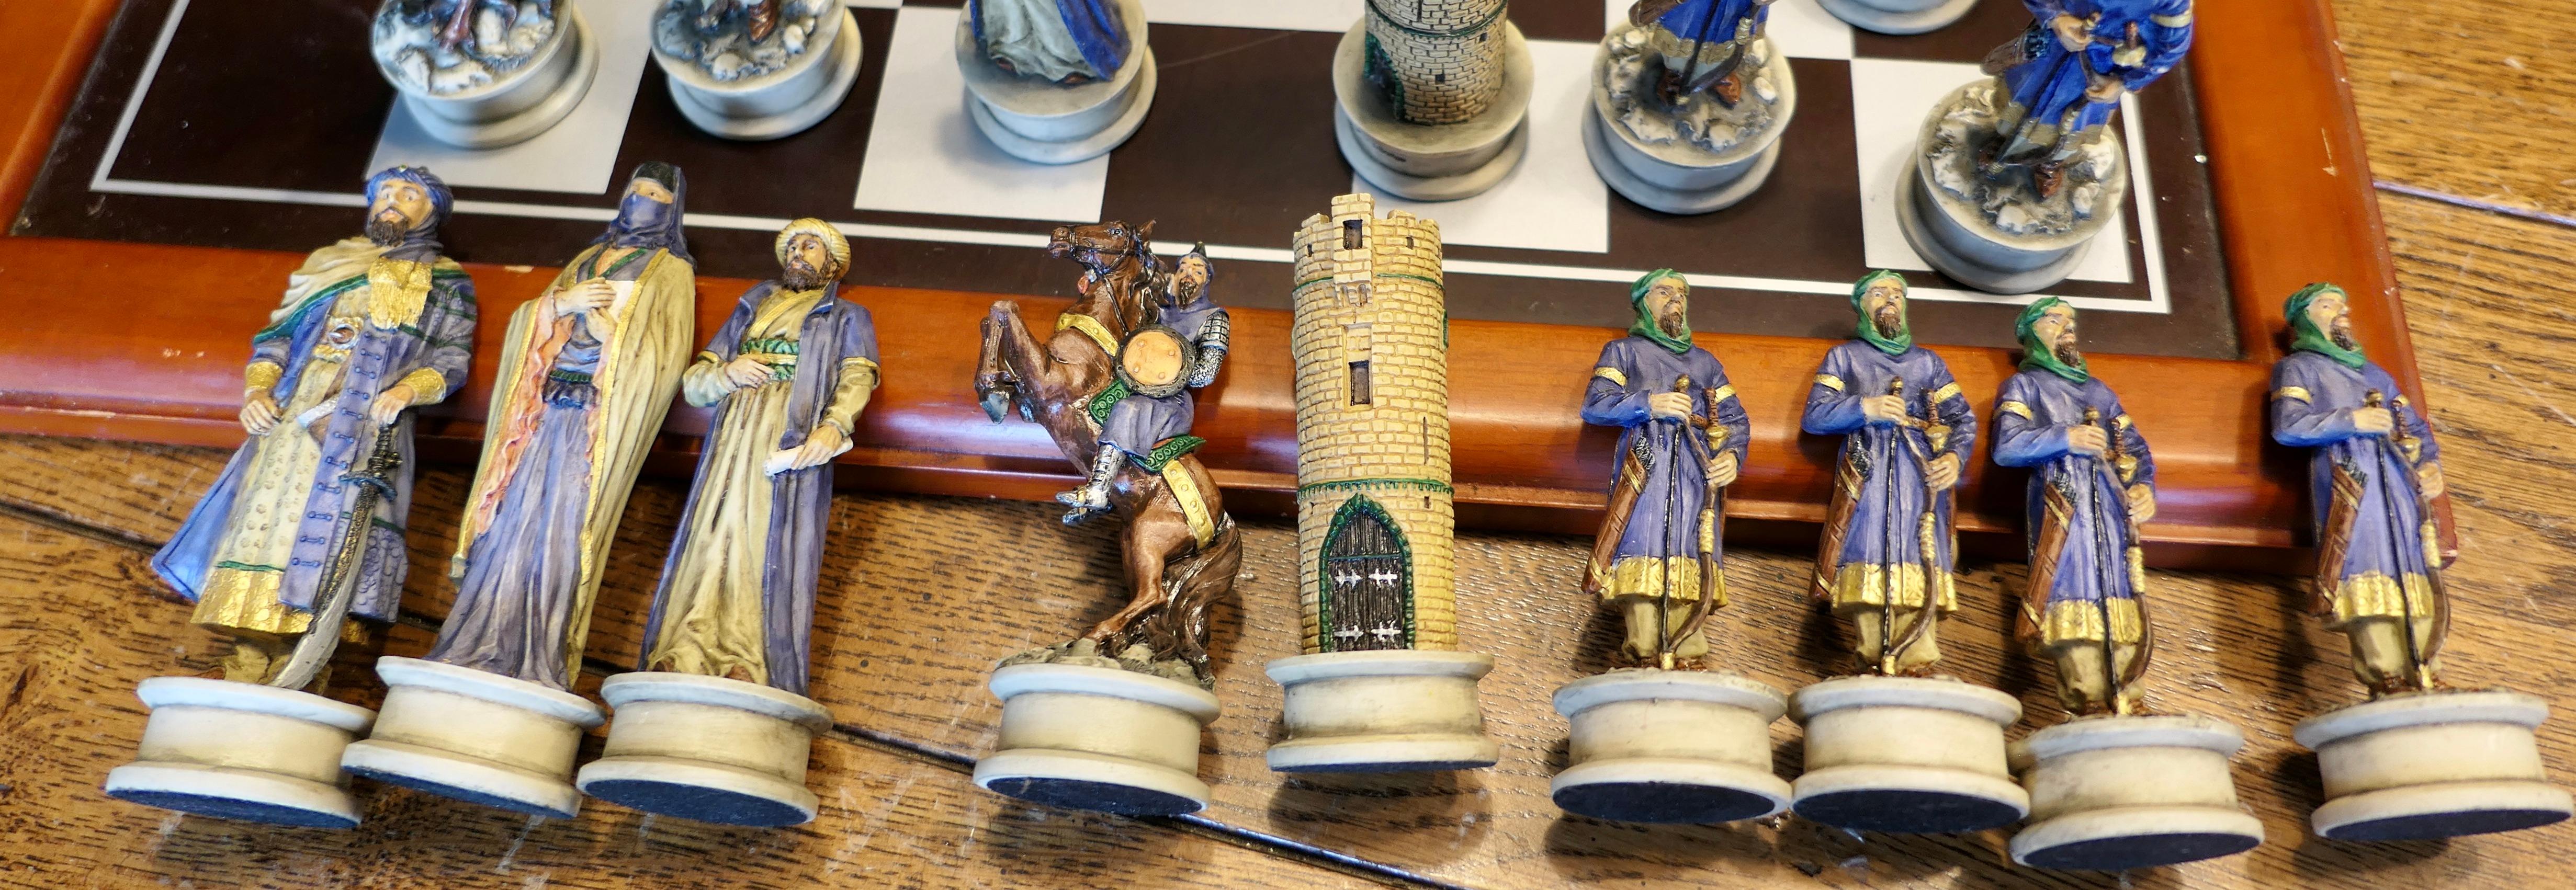 Resin Chess Set with Crusader and Saracen Figures  An interesting slant on the game   For Sale